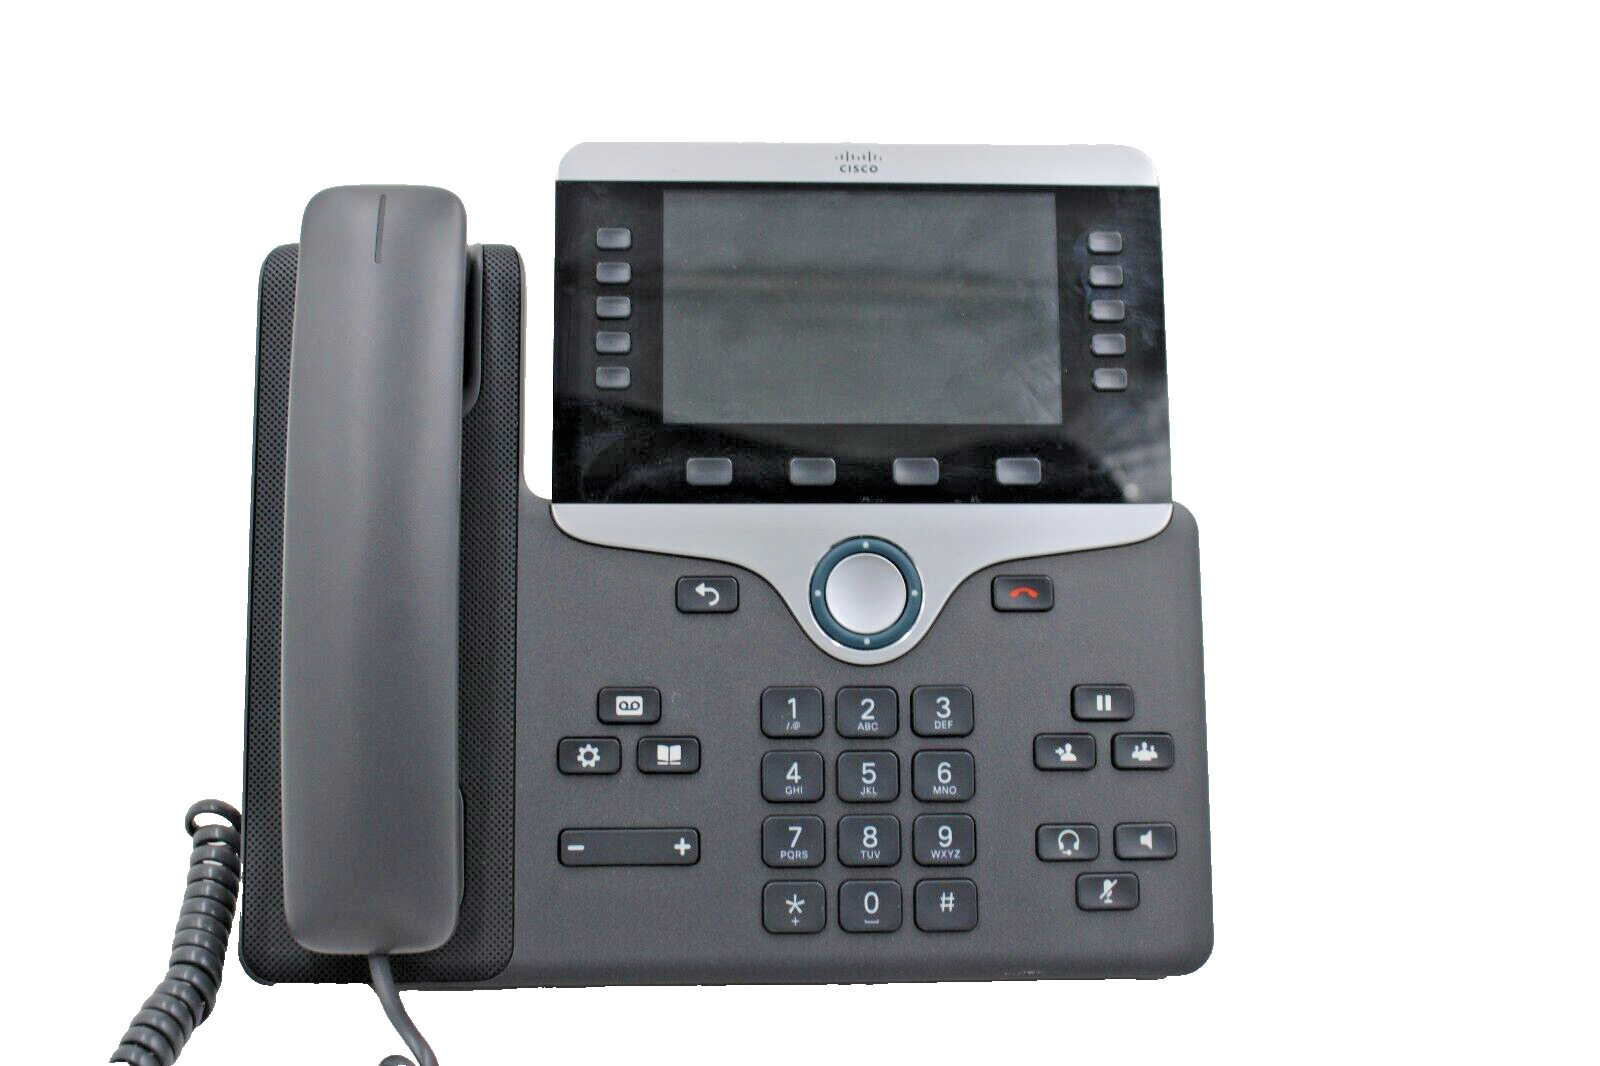 Cisco CP-8811-K9 Unified Office IP VoIP PoE Business Phone w/ Stand & Handset